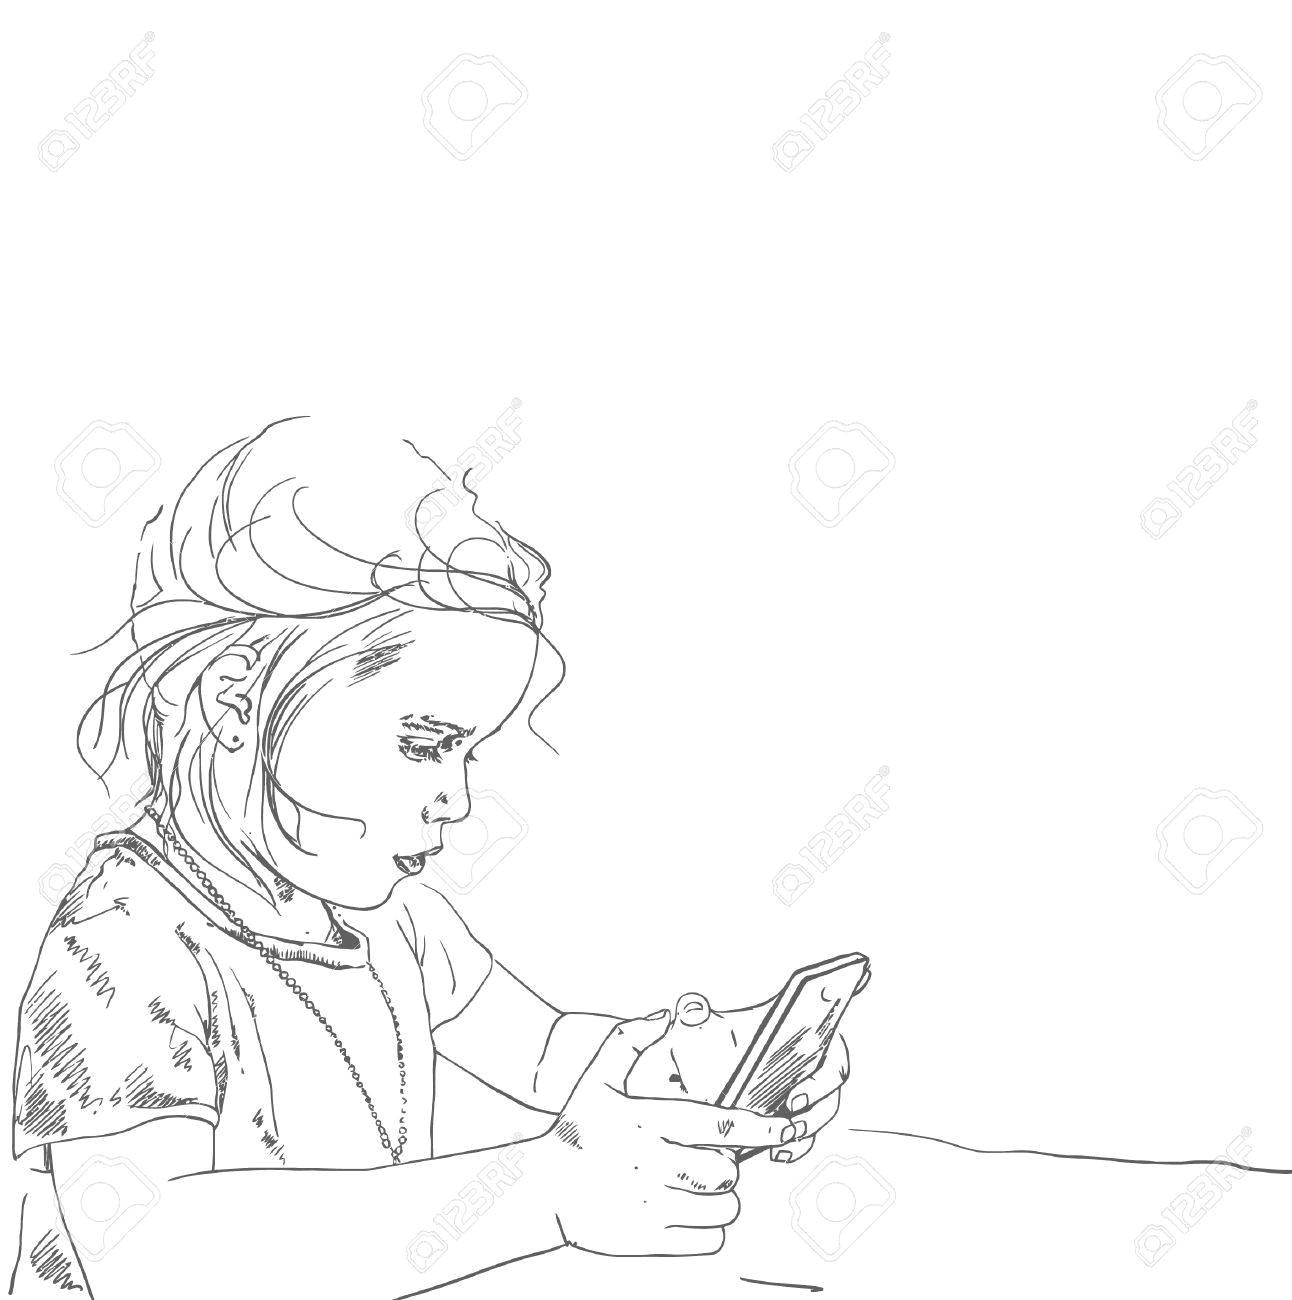 Drawing Of A Girl On Her Phone Drawing Illustration Of Little Five Years Old Girl Holding and